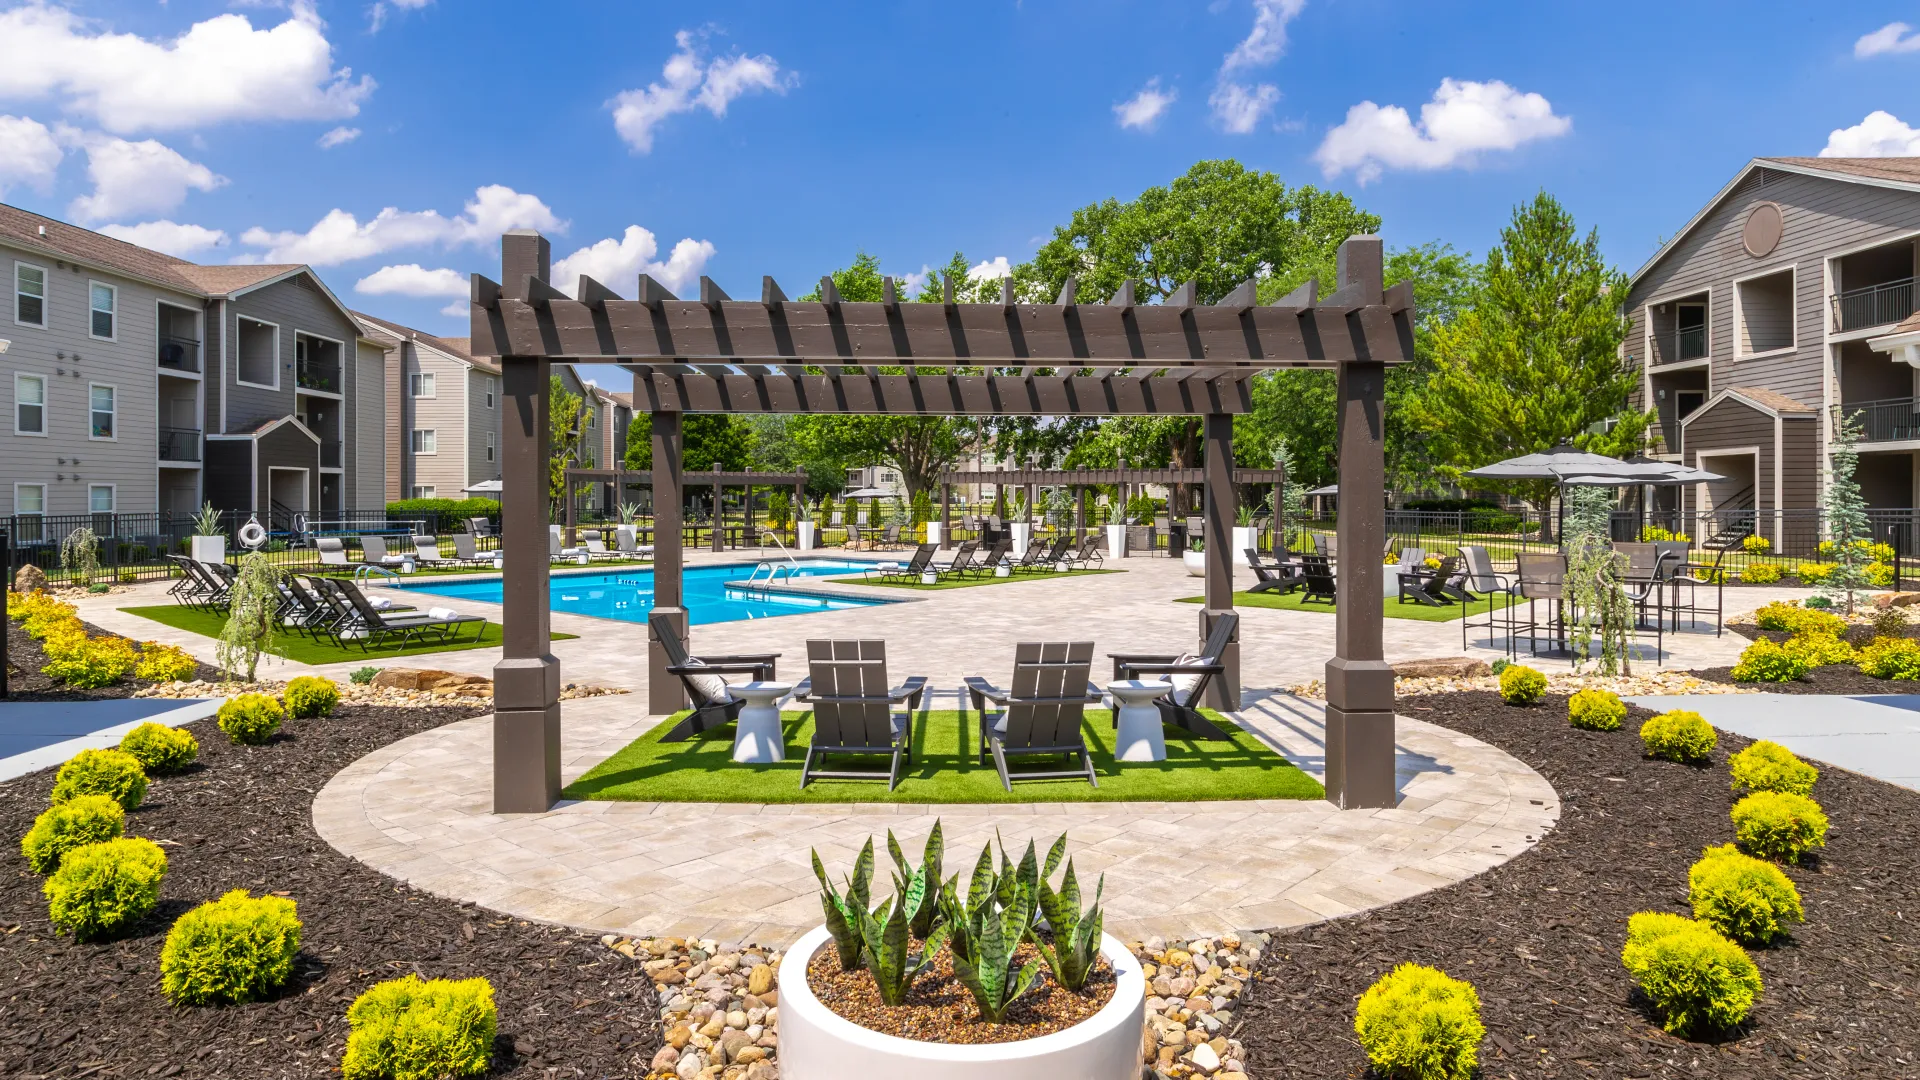 Serene poolside retreatfeaturing modern pergolas, cozy seating areas, lush landscaping, and beautiful apartment buildings, offering a perfect setting for relaxation and enjoyment.